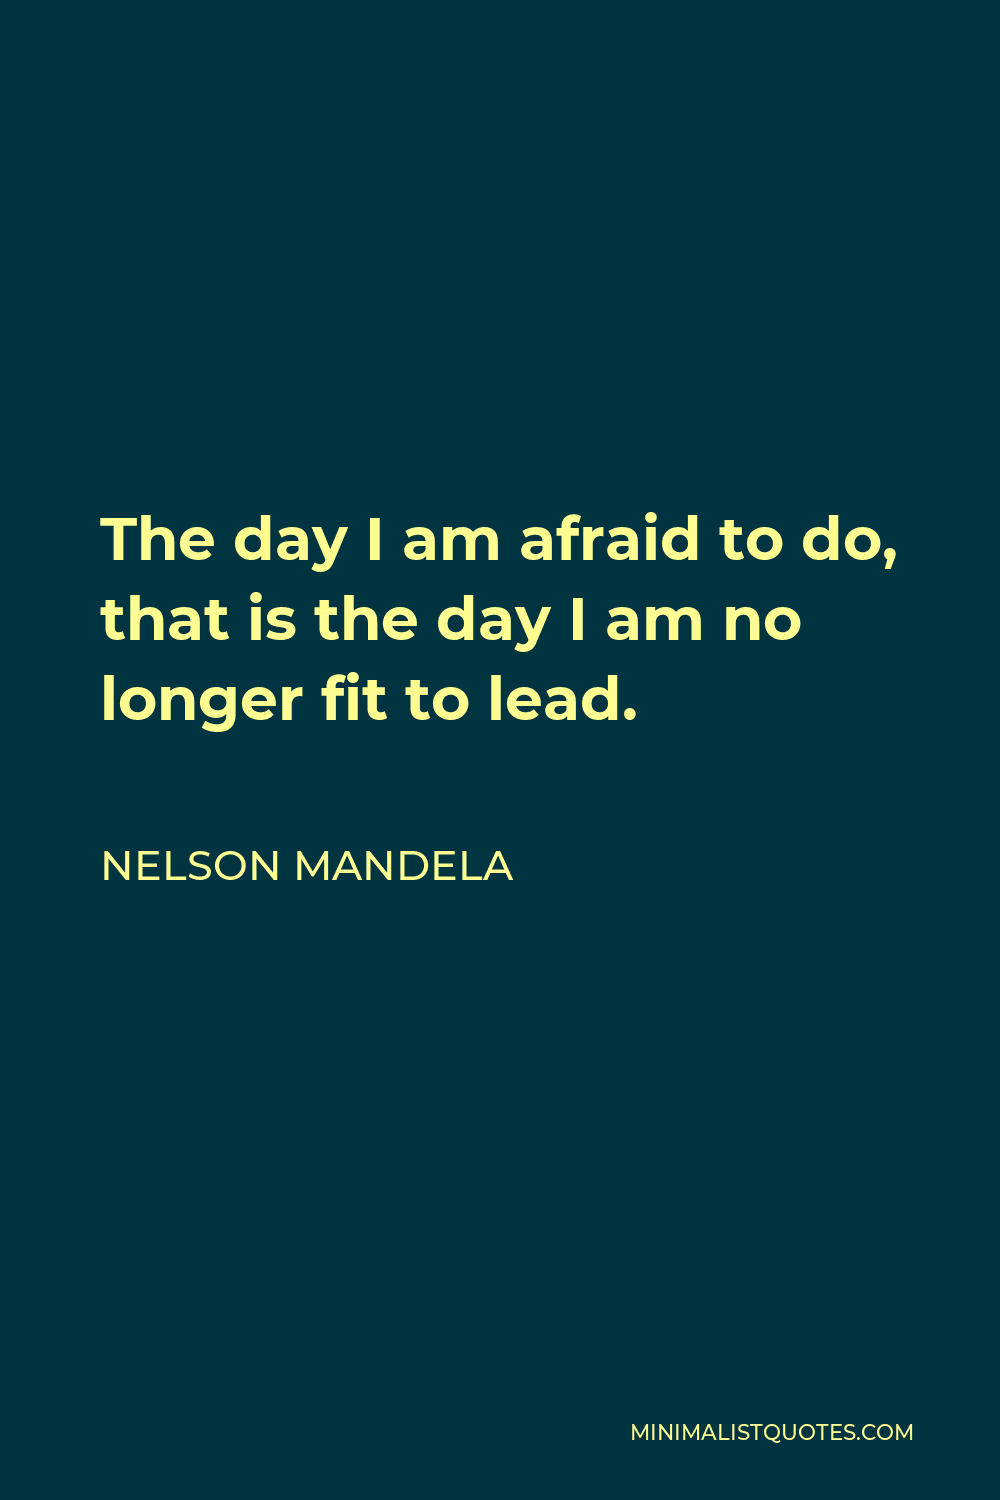 Nelson Mandela Quote - The day I am afraid to do, that is the day I am no longer fit to lead.